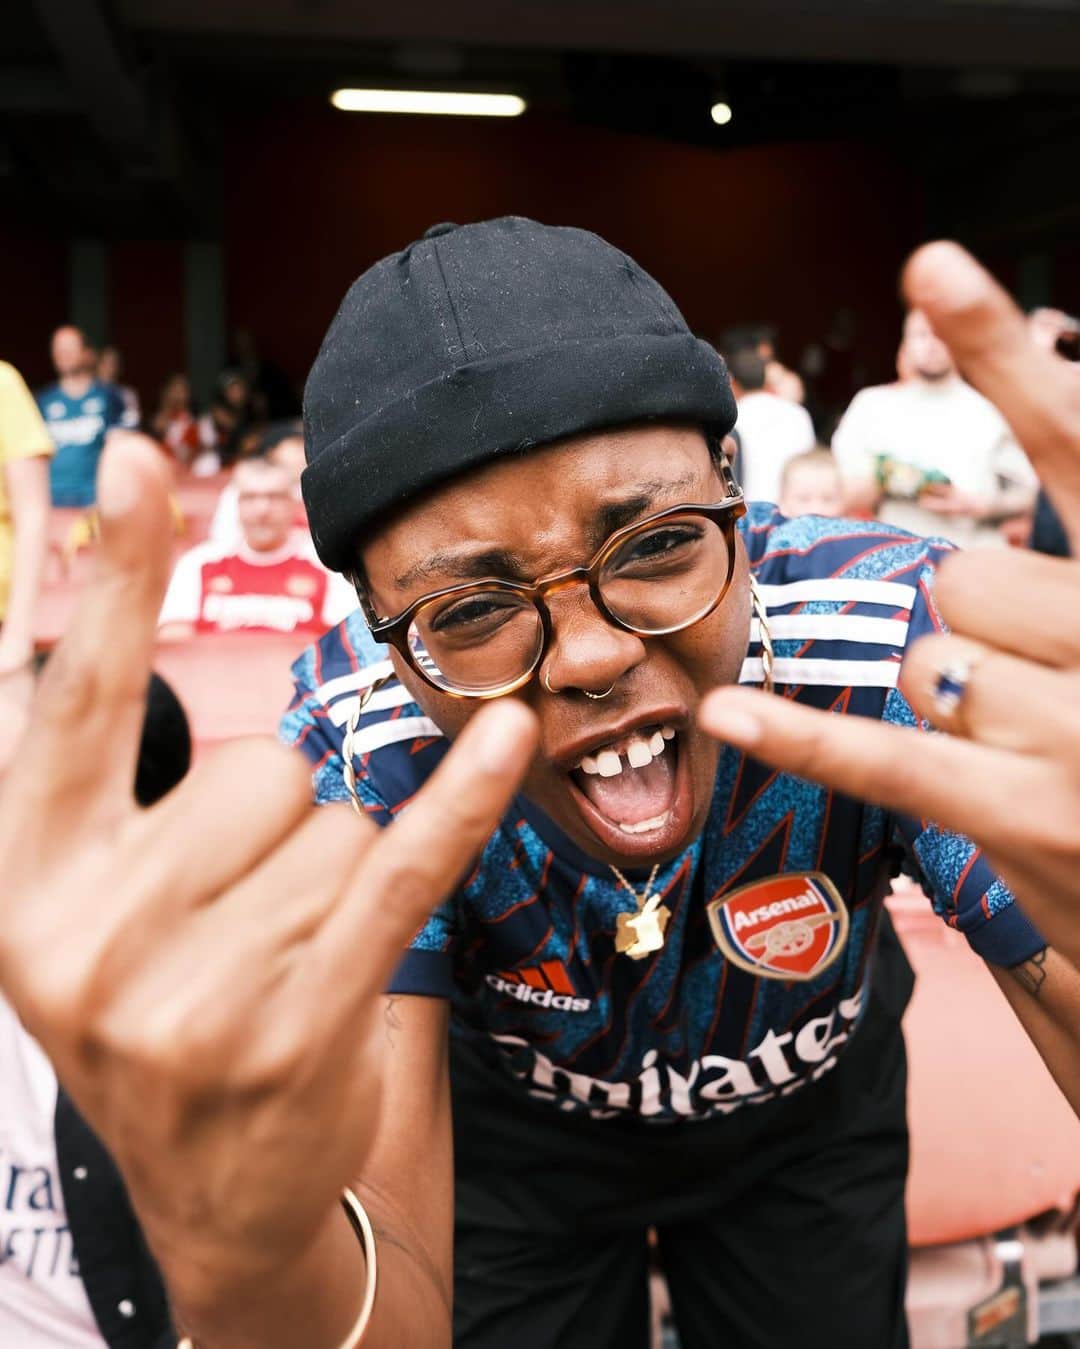 Arsenal Ladiesのインスタグラム：「55,000 TICKETS SOLD 🤩  We can’t wait to see you all on Sunday, Gooners. Let’s sell out Emirates Stadium! 👏  Photos in collaboration with @susana_rf 📸」